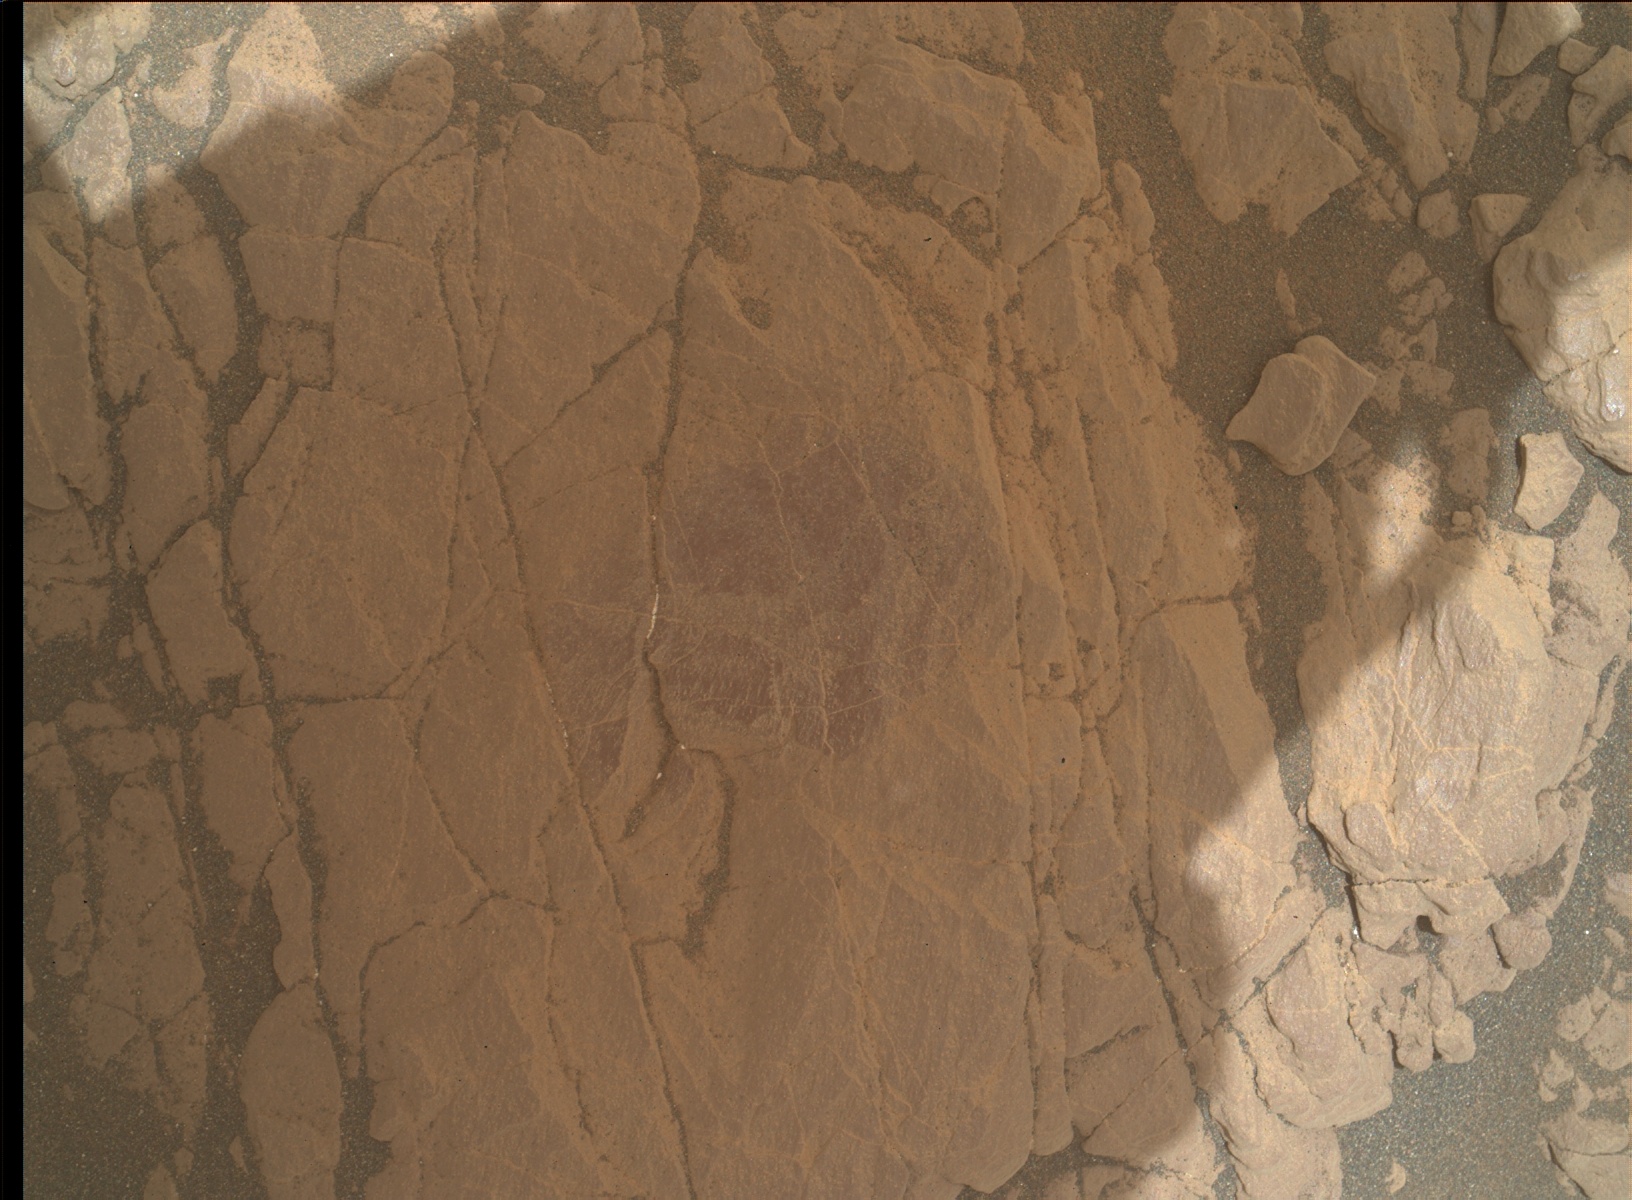 Nasa's Mars rover Curiosity acquired this image using its Mars Hand Lens Imager (MAHLI) on Sol 2368